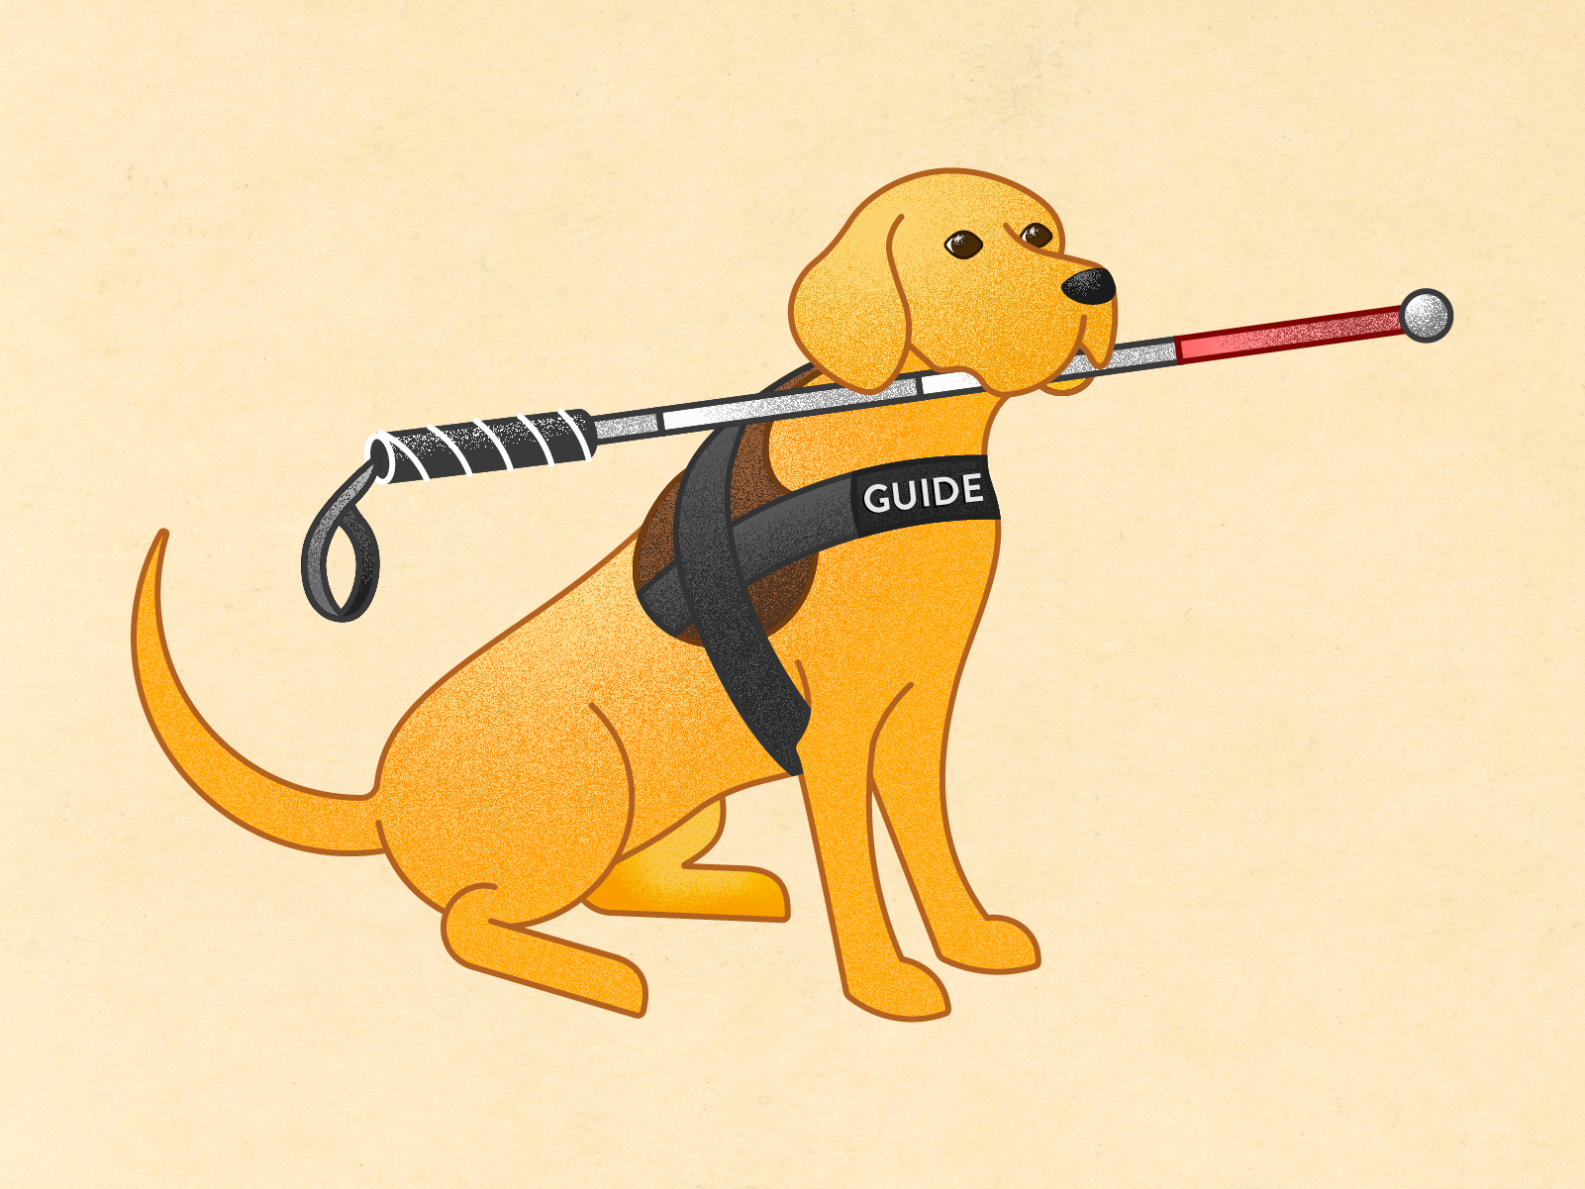 Guide Dog with White Cane by David H☻☻K on Dribbble